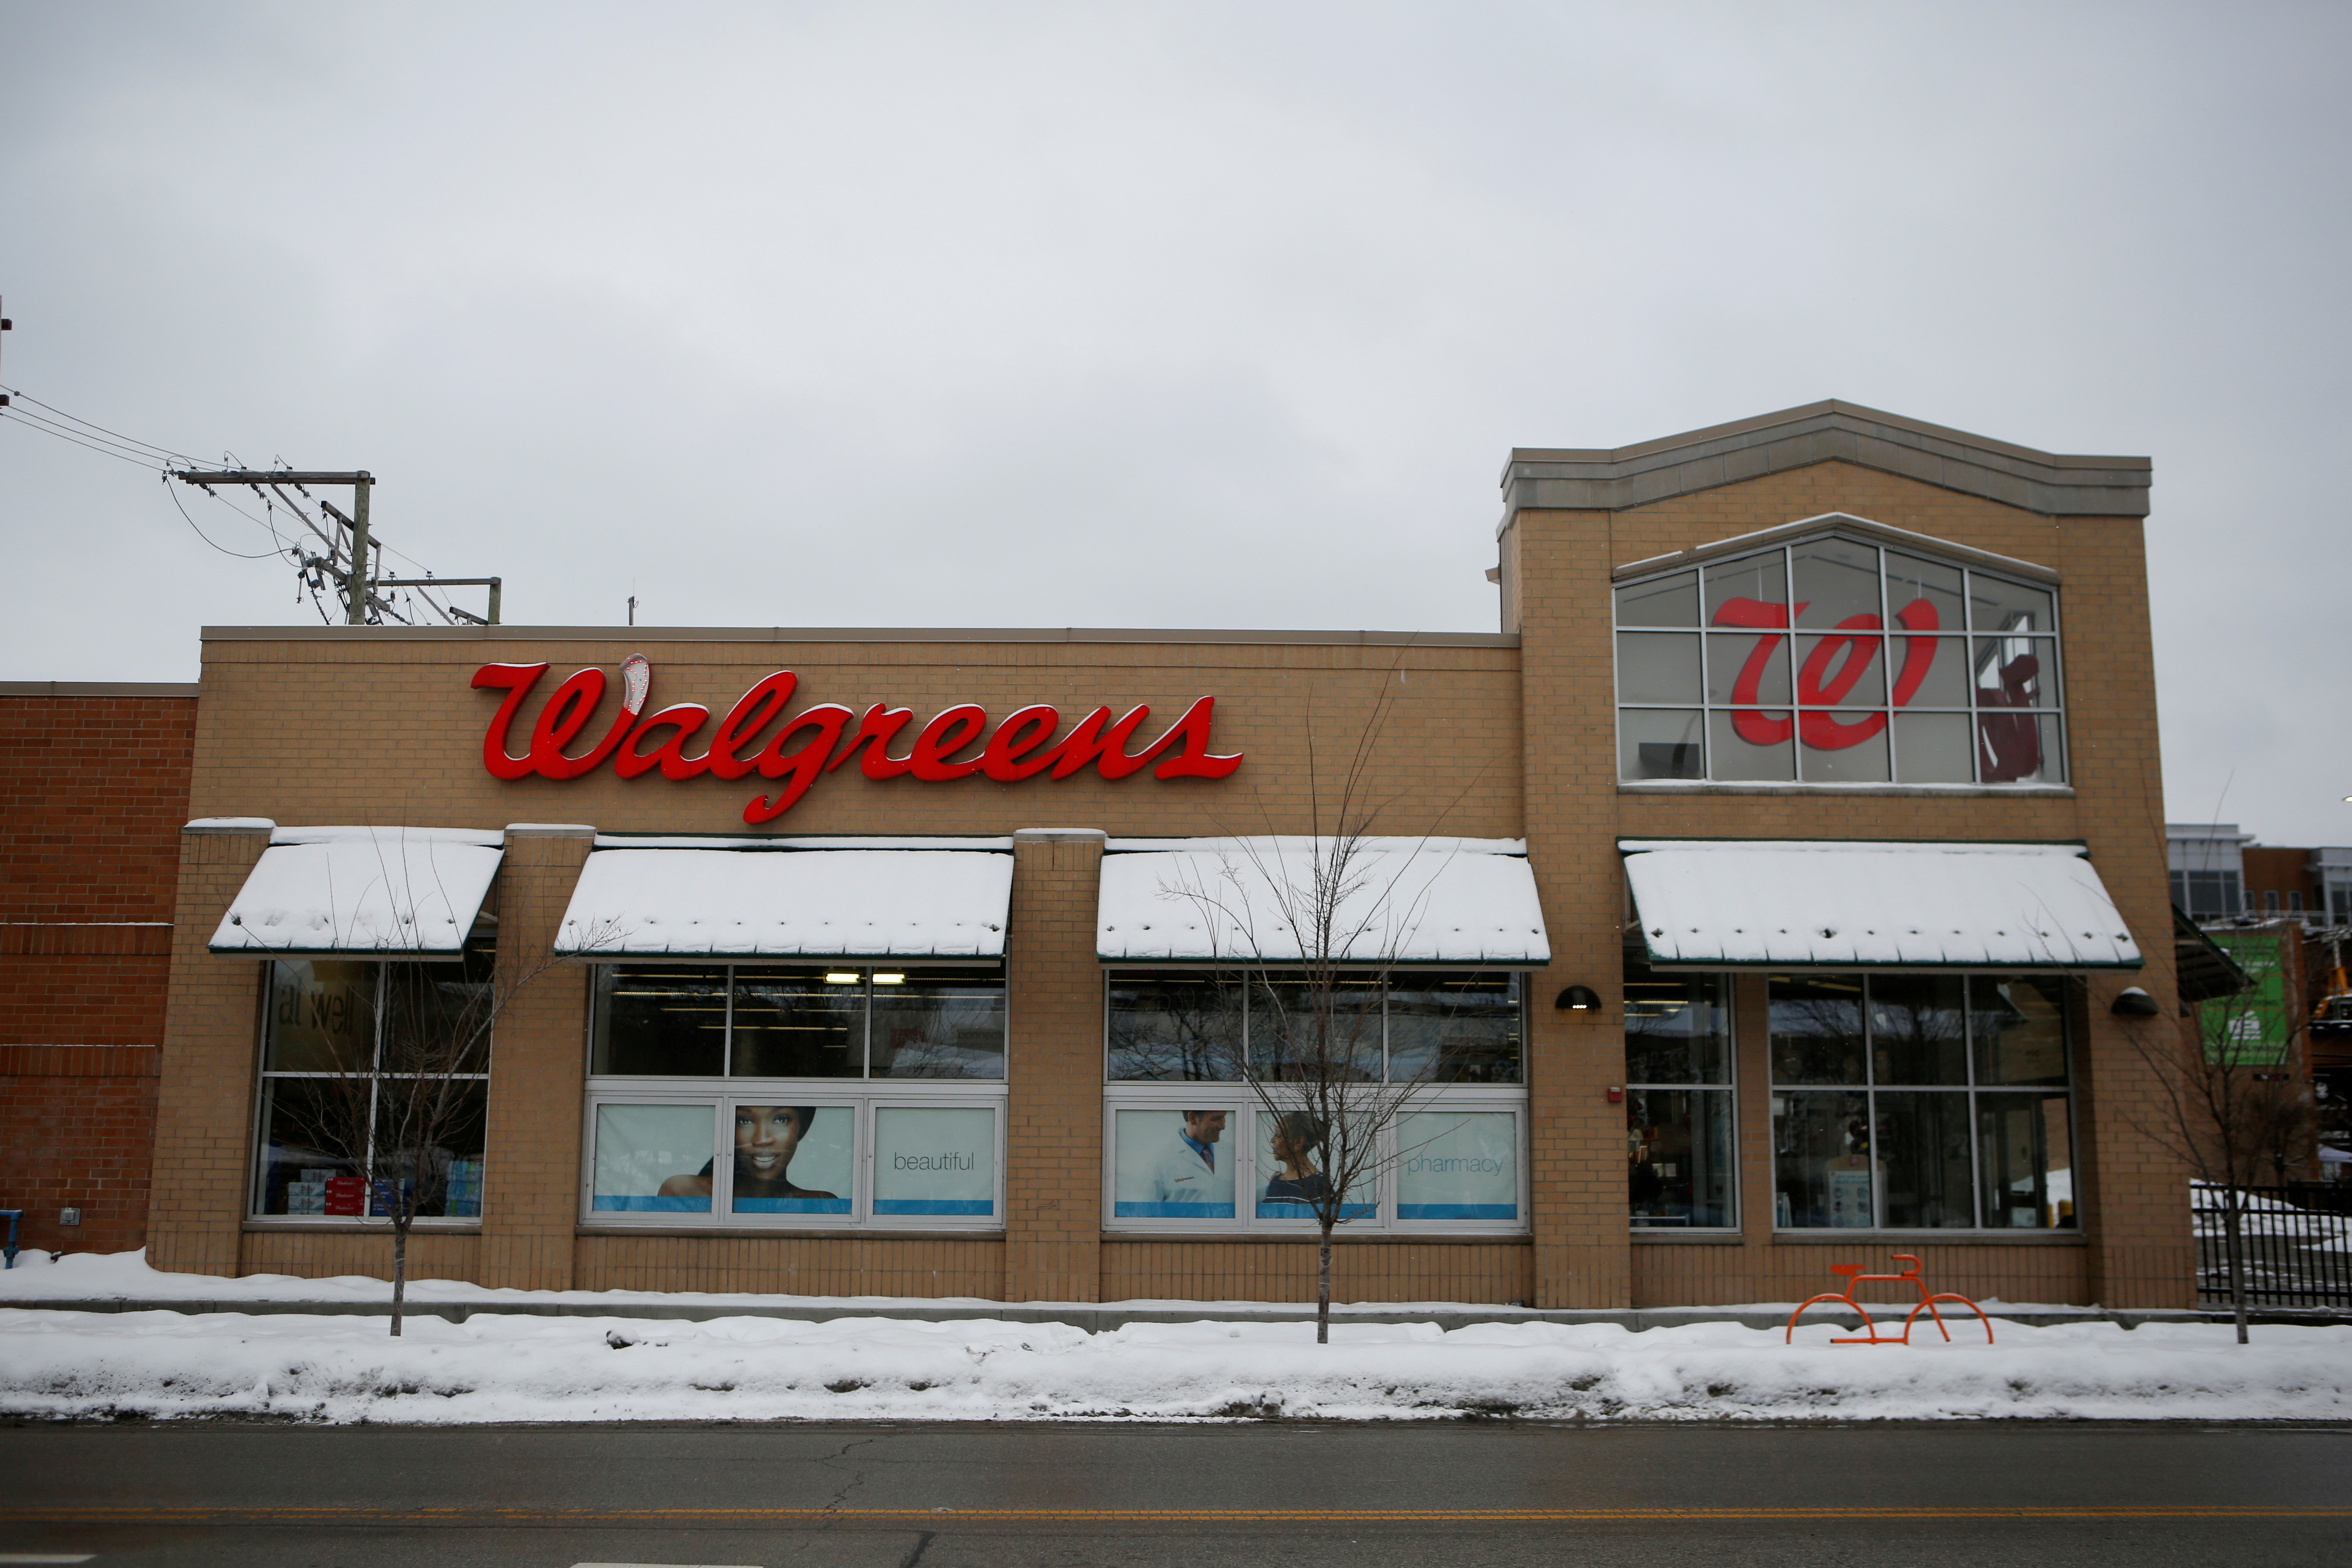 A Walgreens store is seen in Chicago, Illinois, U.S. February 11, 2021.  REUTERS/Eileen T. Meslar